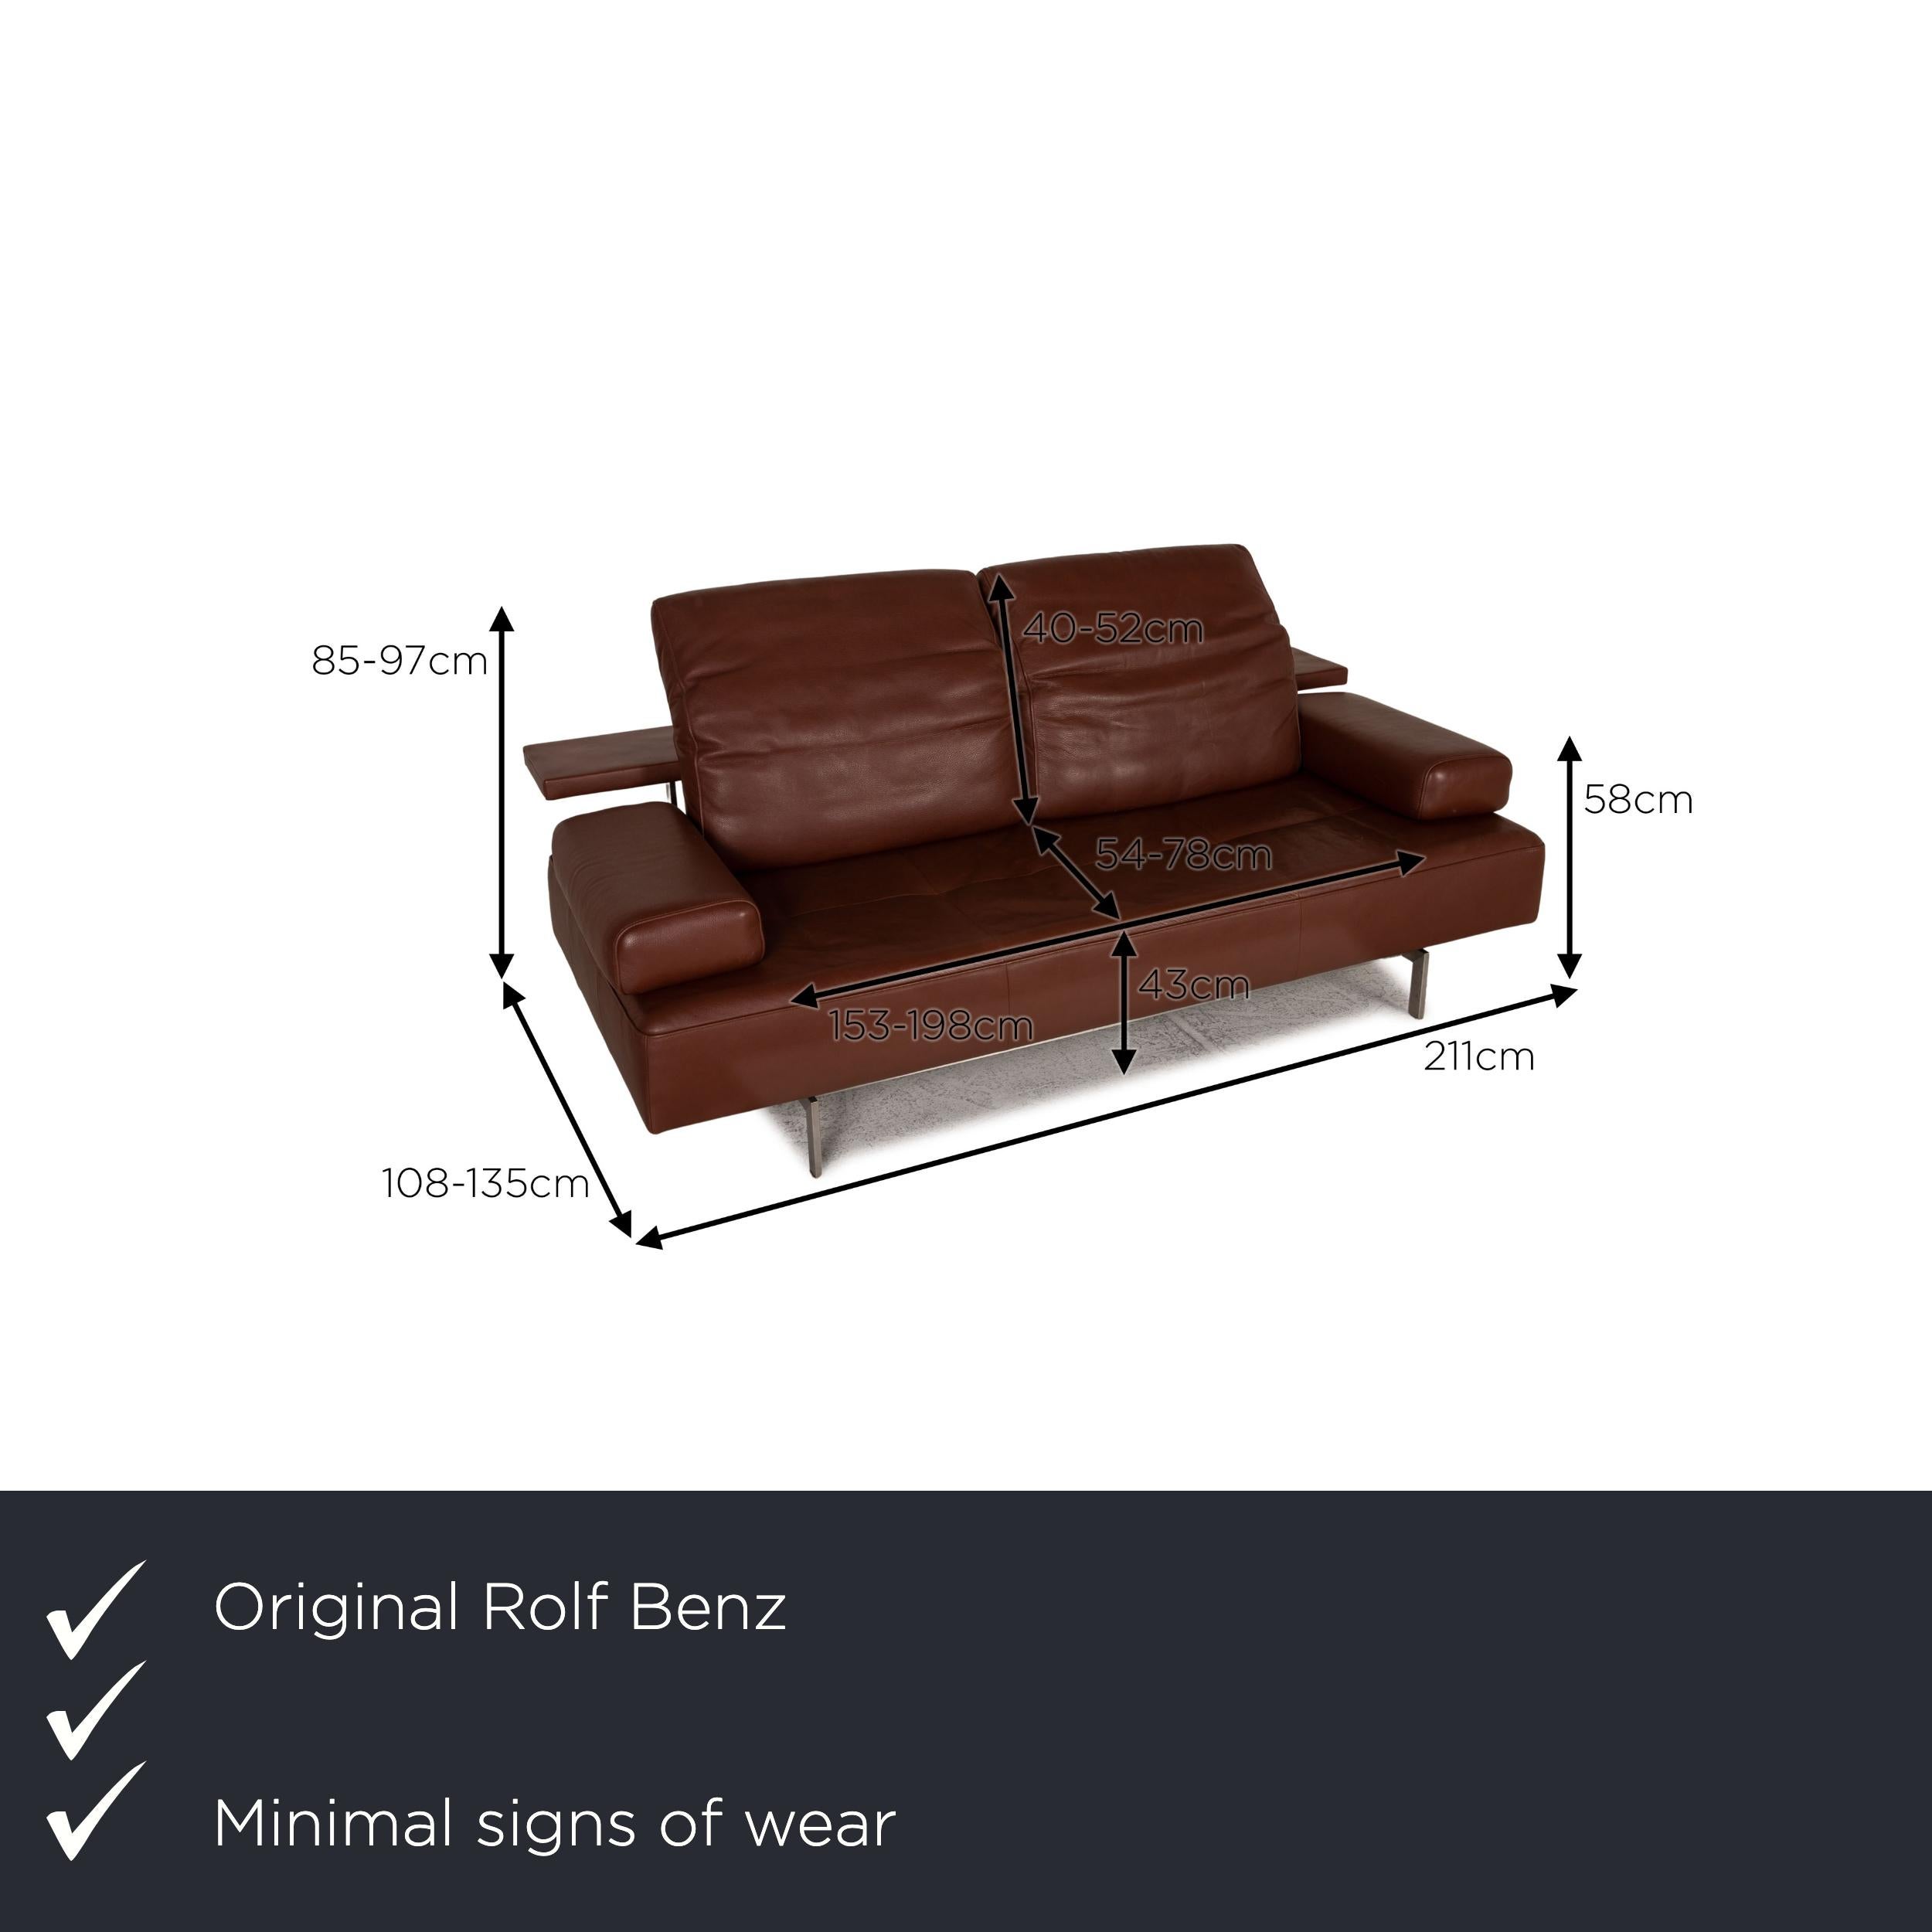 We present to you a Rolf Benz Dono leather sofa brown three-seater couch function.

Product measurements in centimeters:

Measure: depth: 108
width: 211
height: 85
seat height: 43
rest height: 58
seat depth: 54
seat width: 153
back